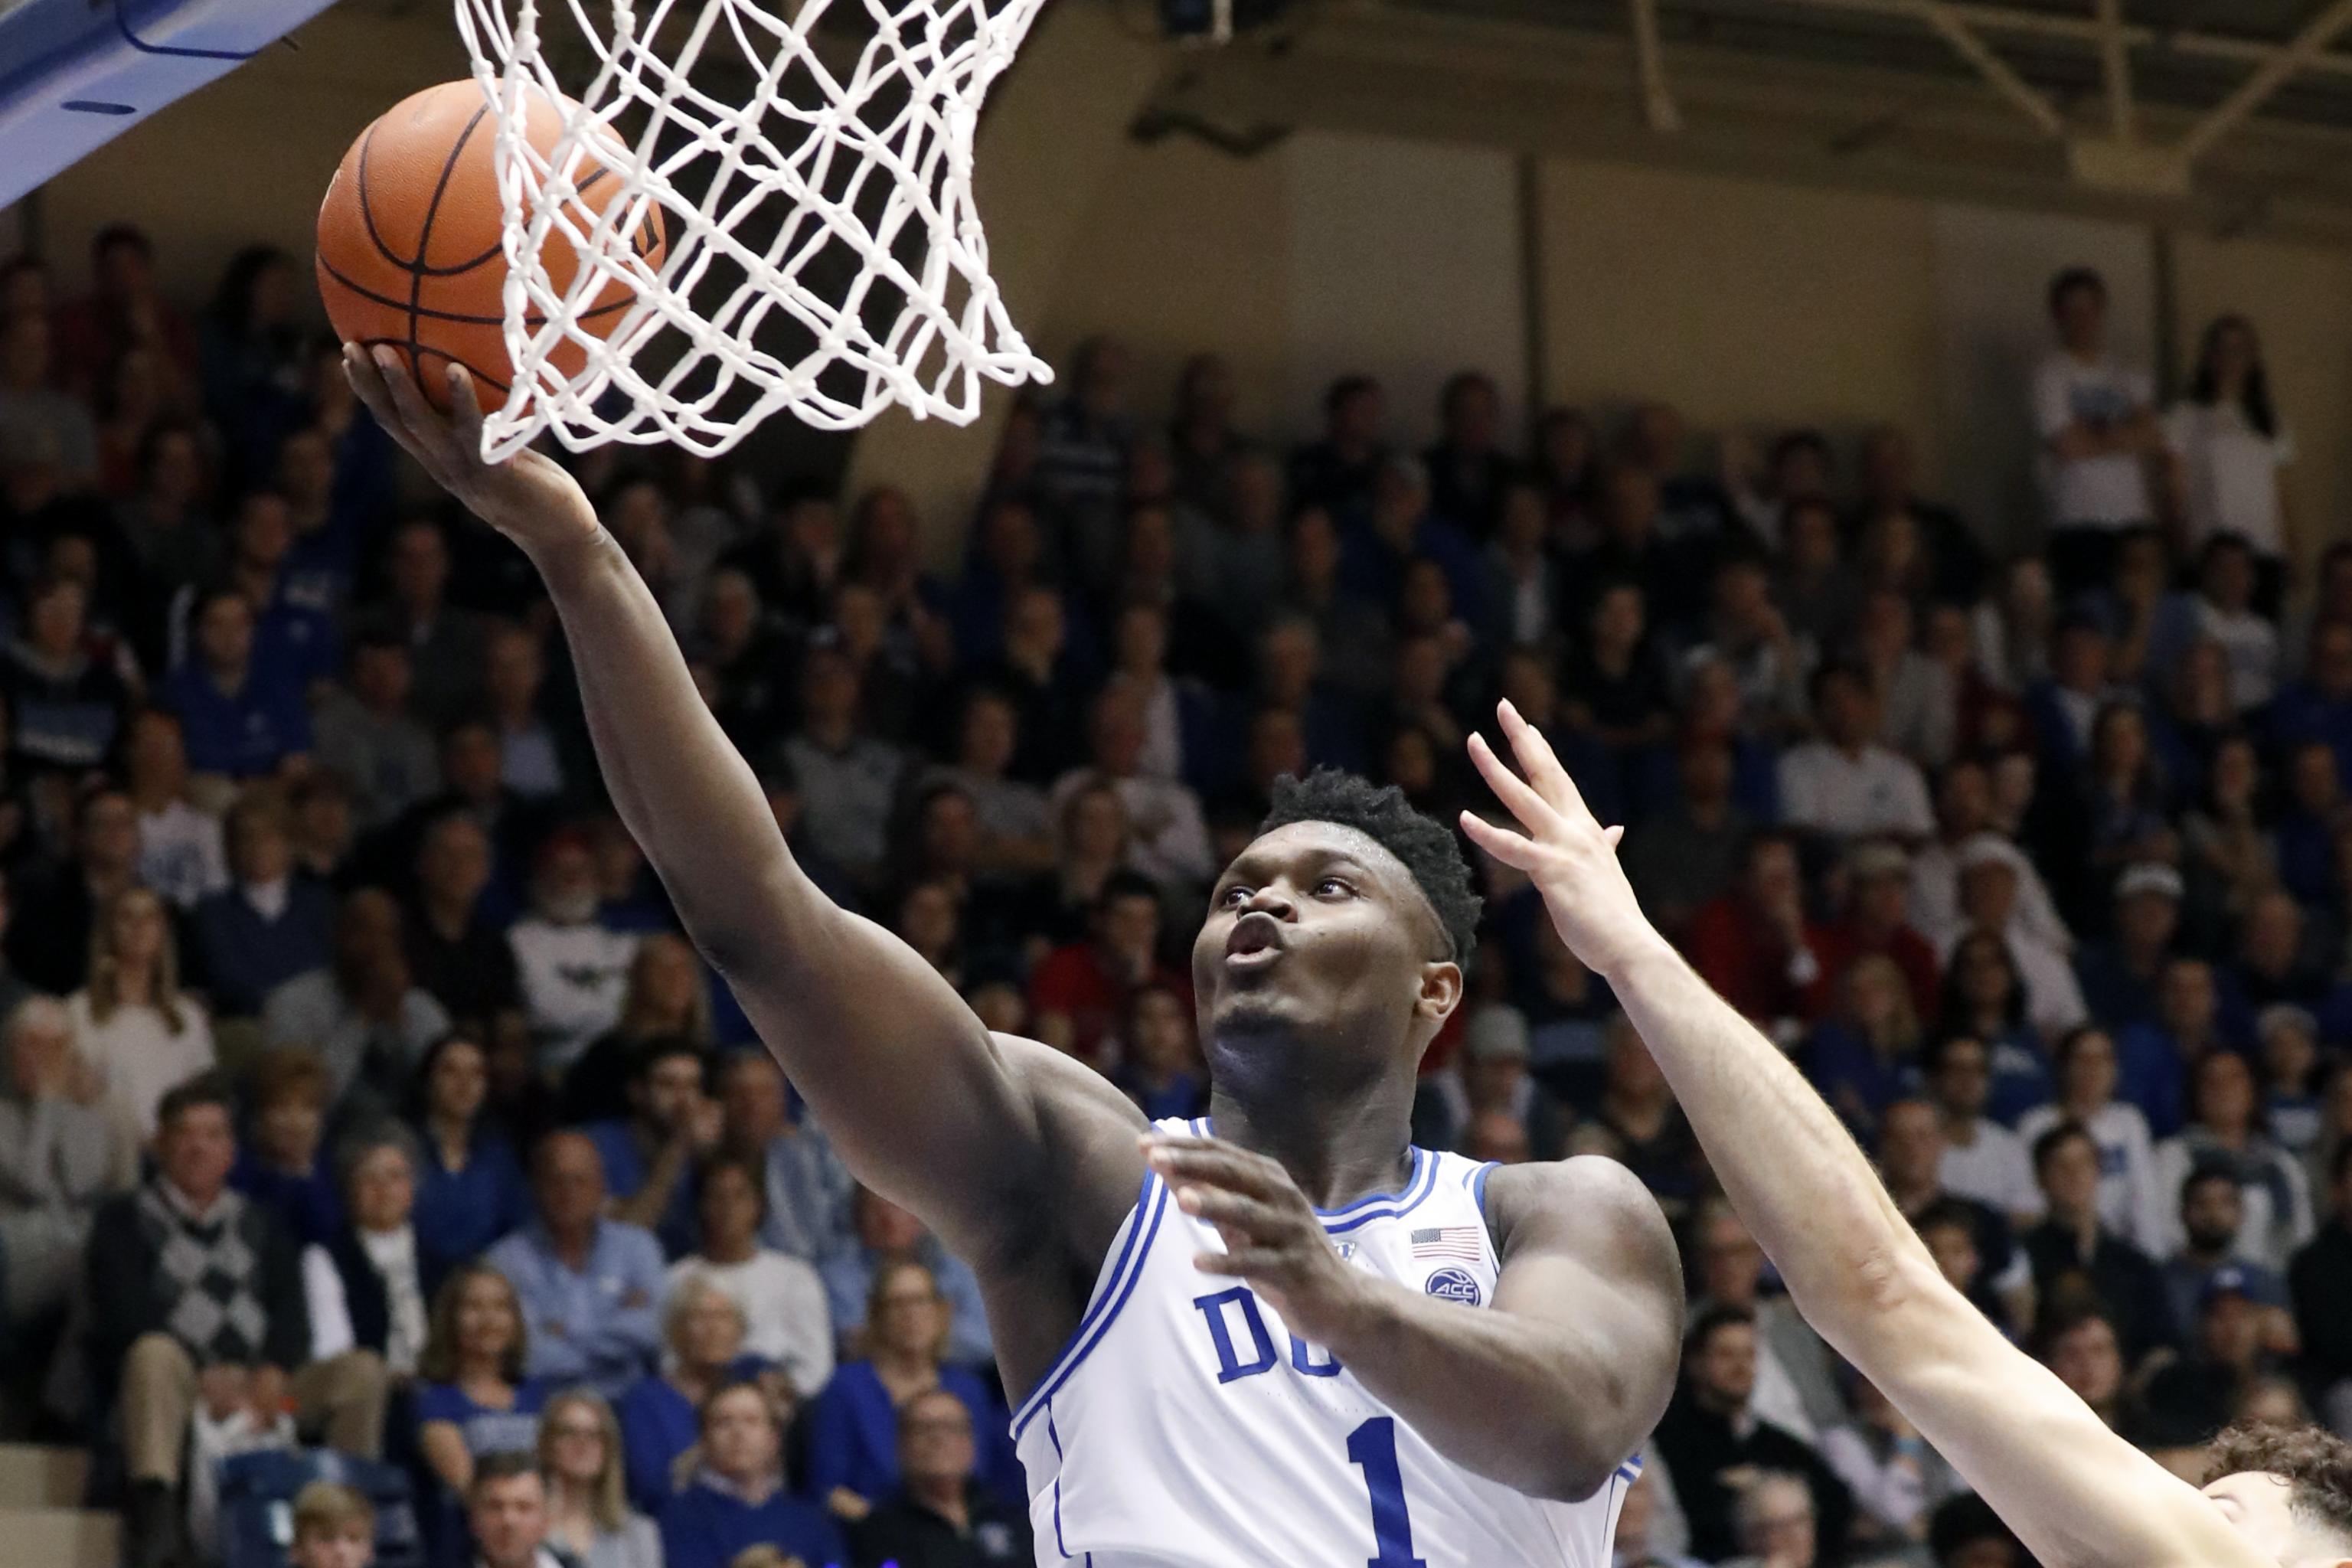 Zion WIlliamson's Former Agent Claims the Basketball Star Received Improper  Benefits to Play at Duke